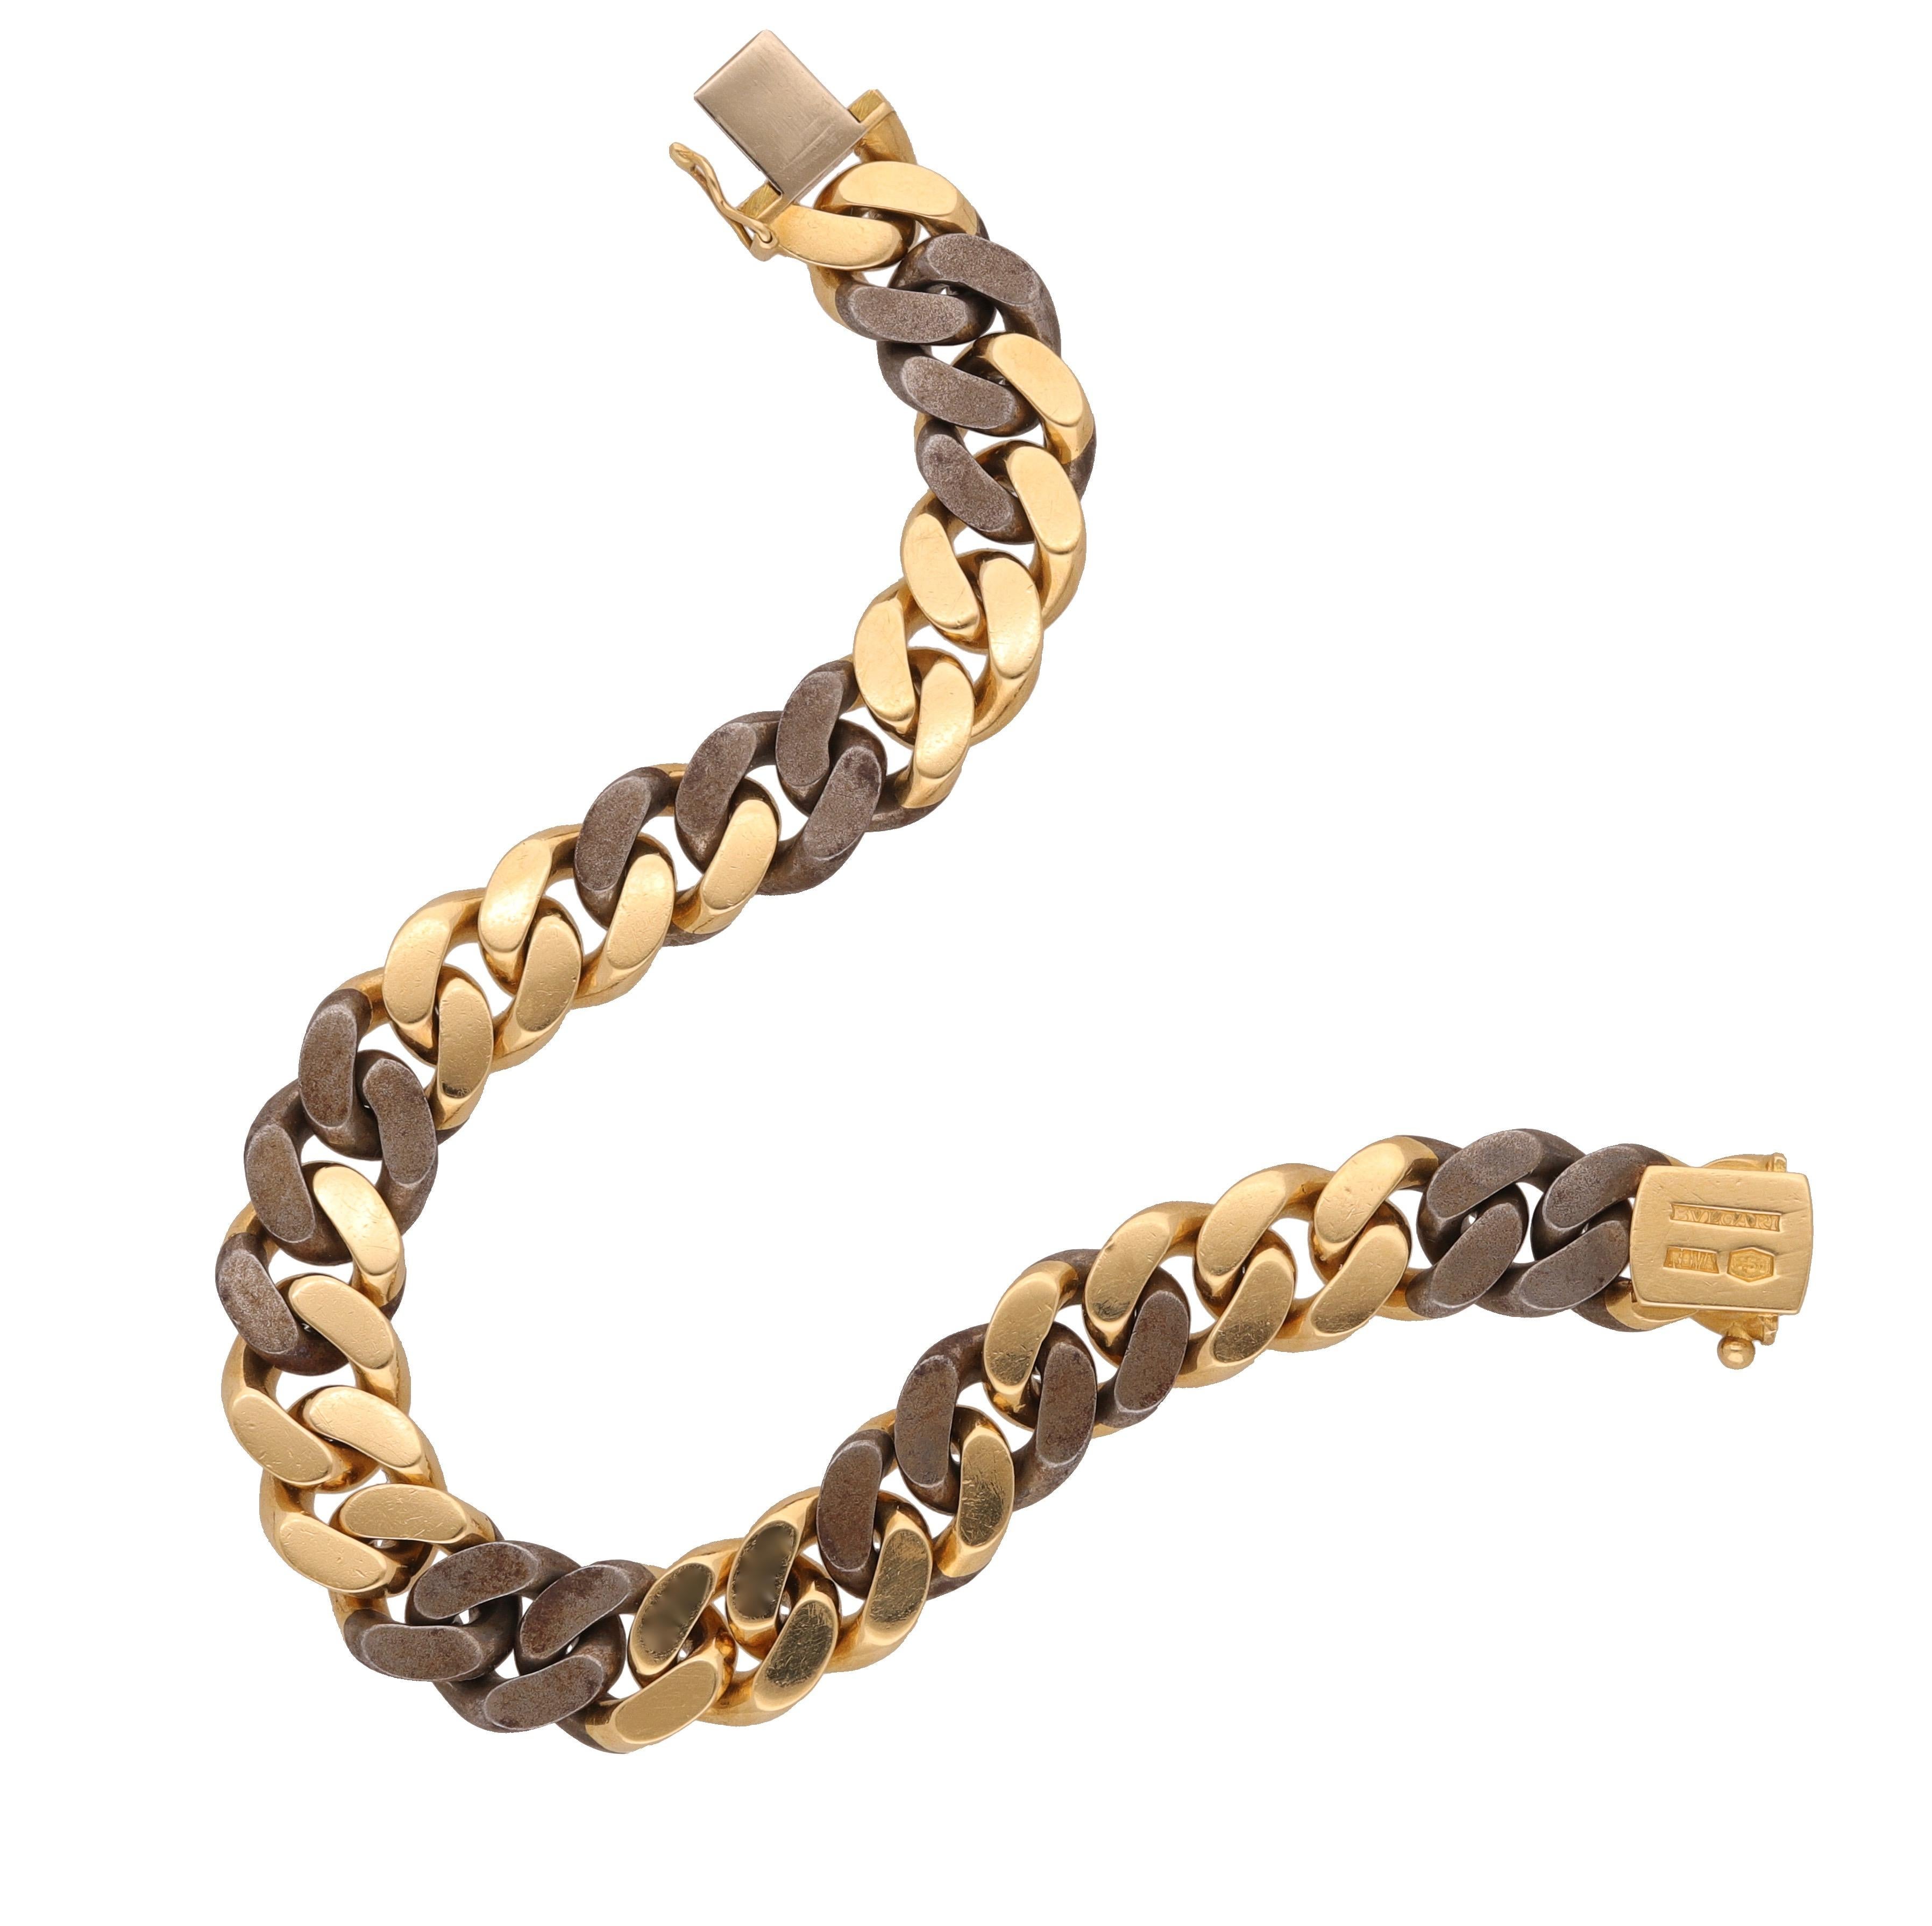 18 kt. yellow gold and steel groumette bracelet signed by Bulgari.
This bracelet is sporty and classic, perfect for any style.
Comes in the original box.